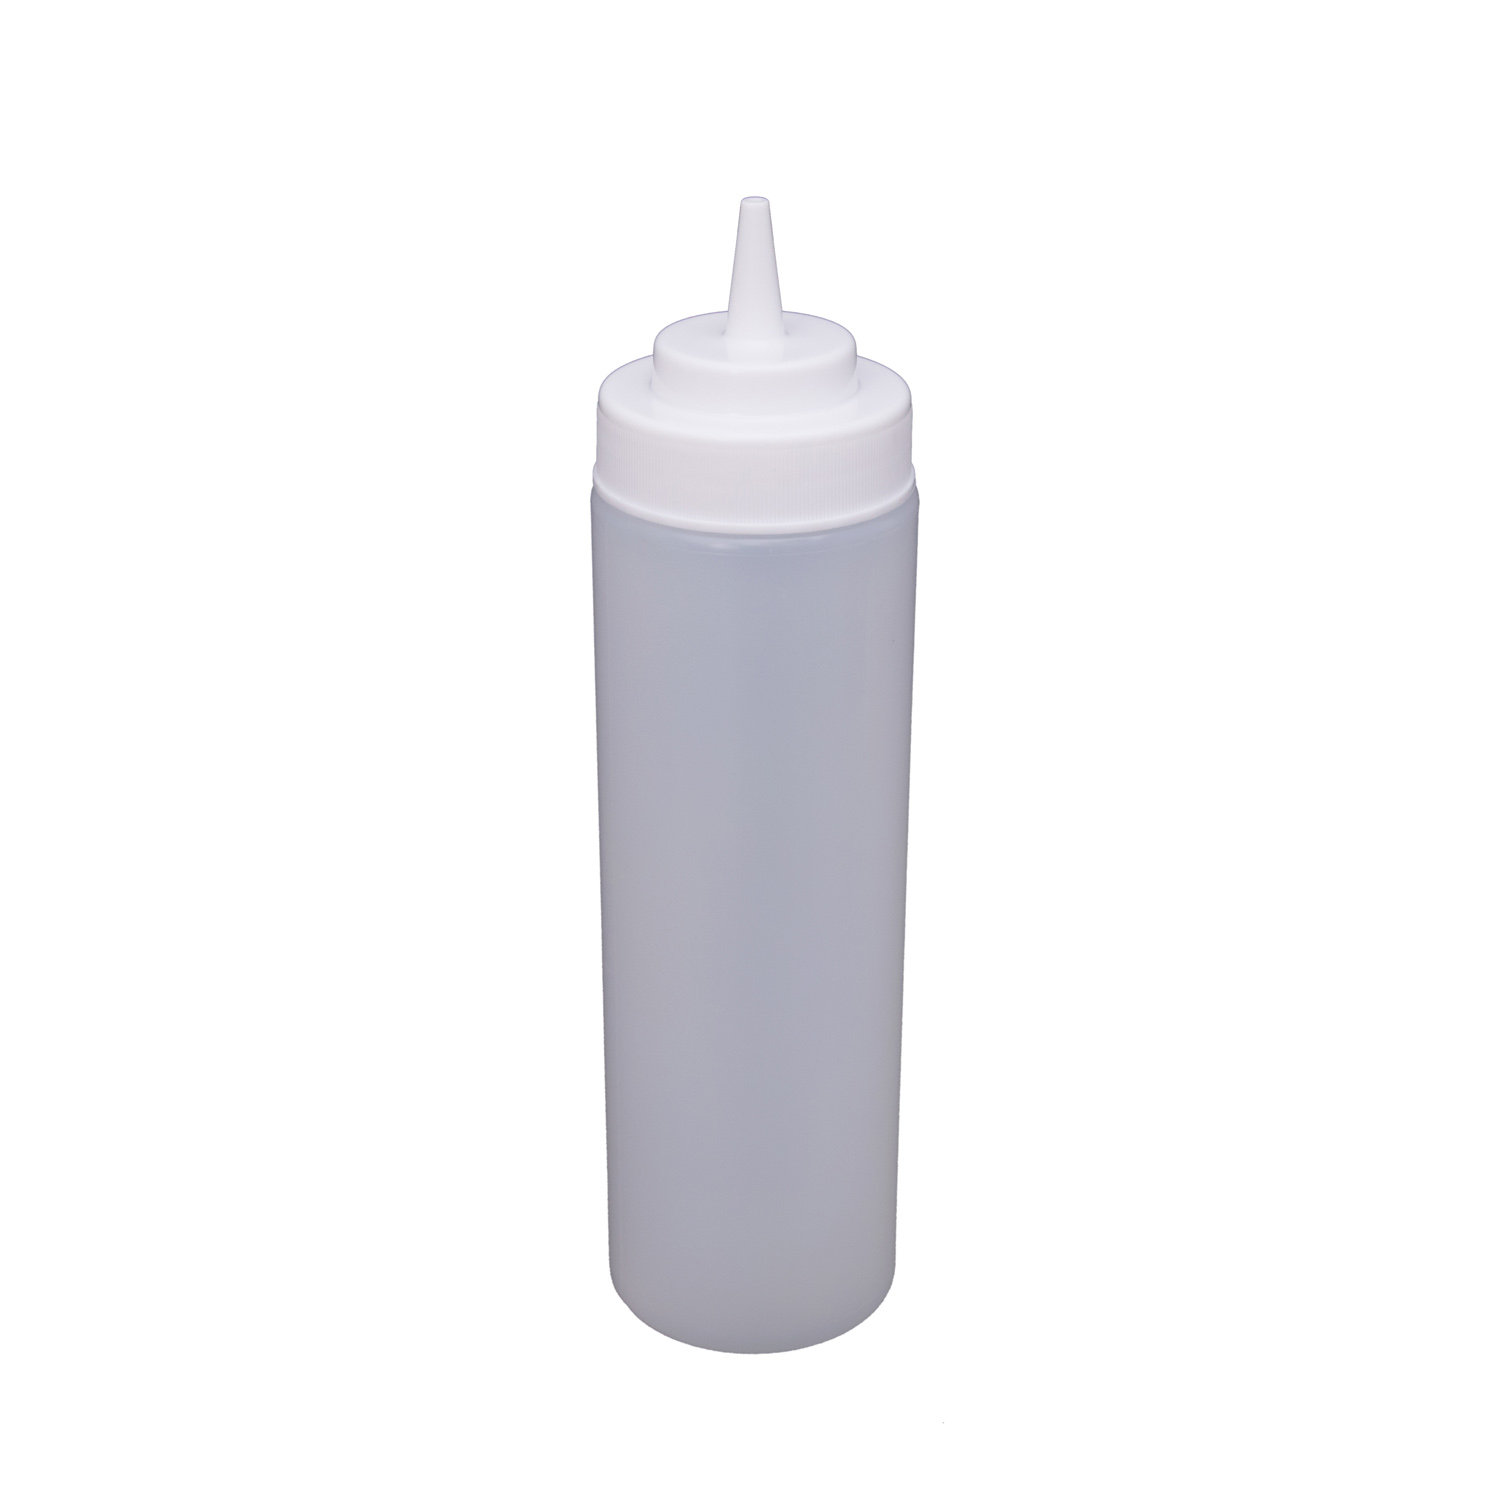 CAC China SQBT-W-24C Clear Wide-Mouth Plastic Squeeze Bottle 24 oz.